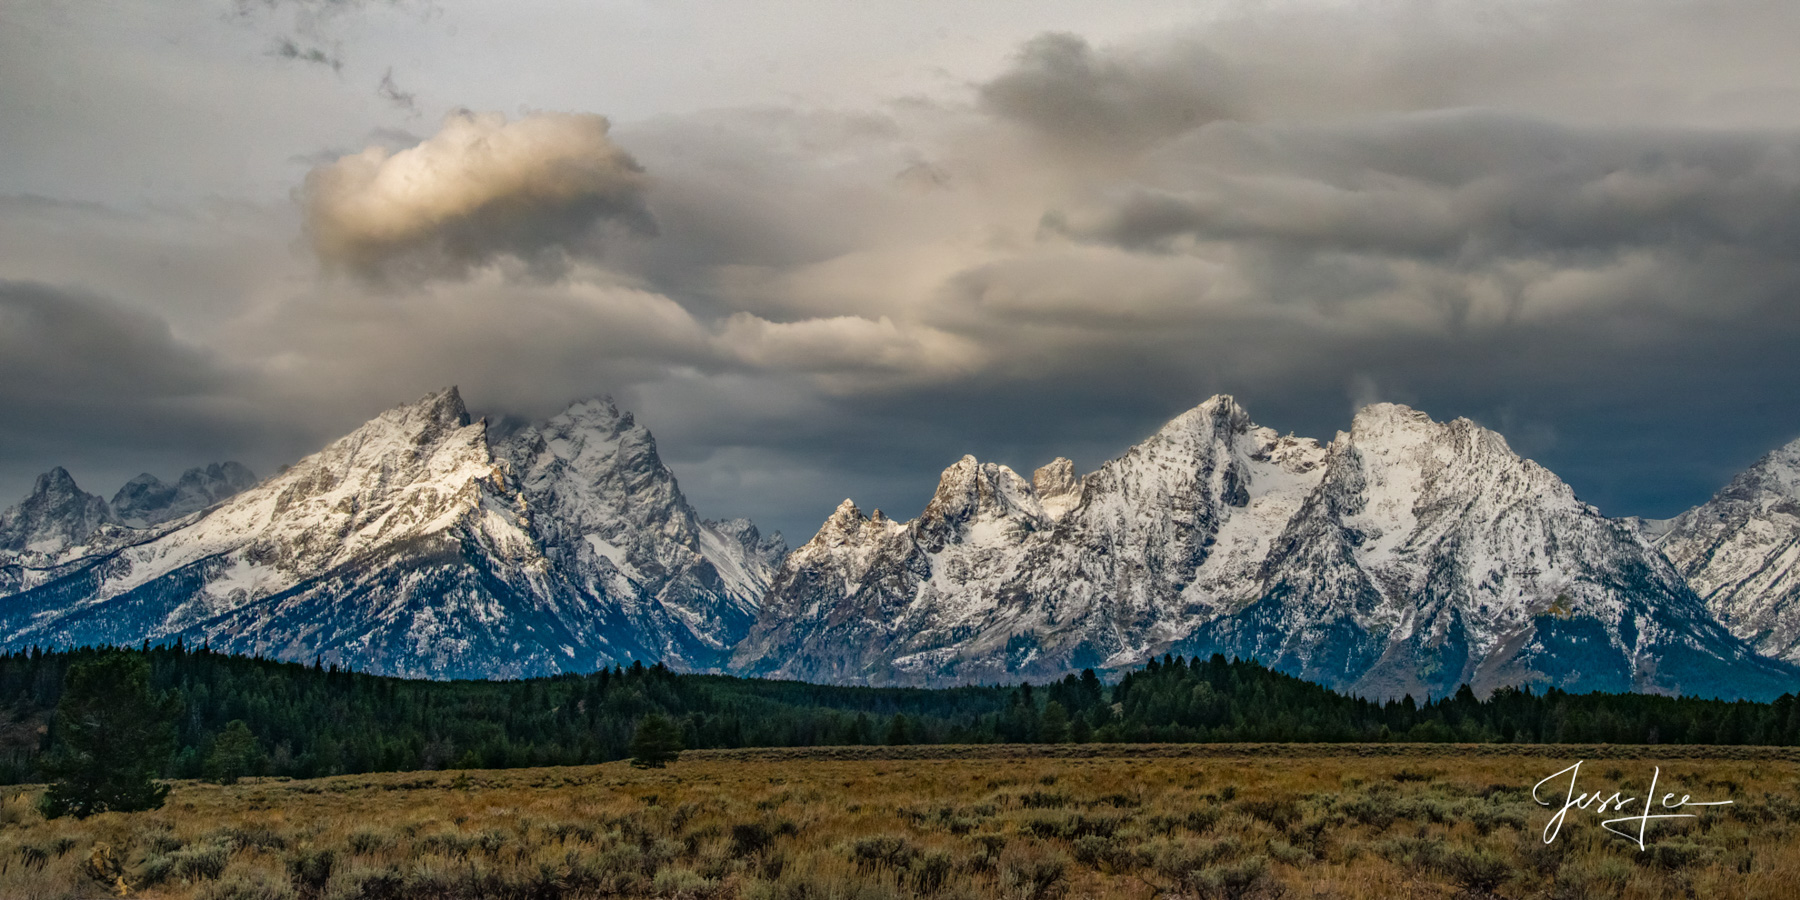 Limited Edition of 50 Exclusive high-resolution Museum Quality Fine Art Prints of Clouds over the Tetons a Panorama Photography...